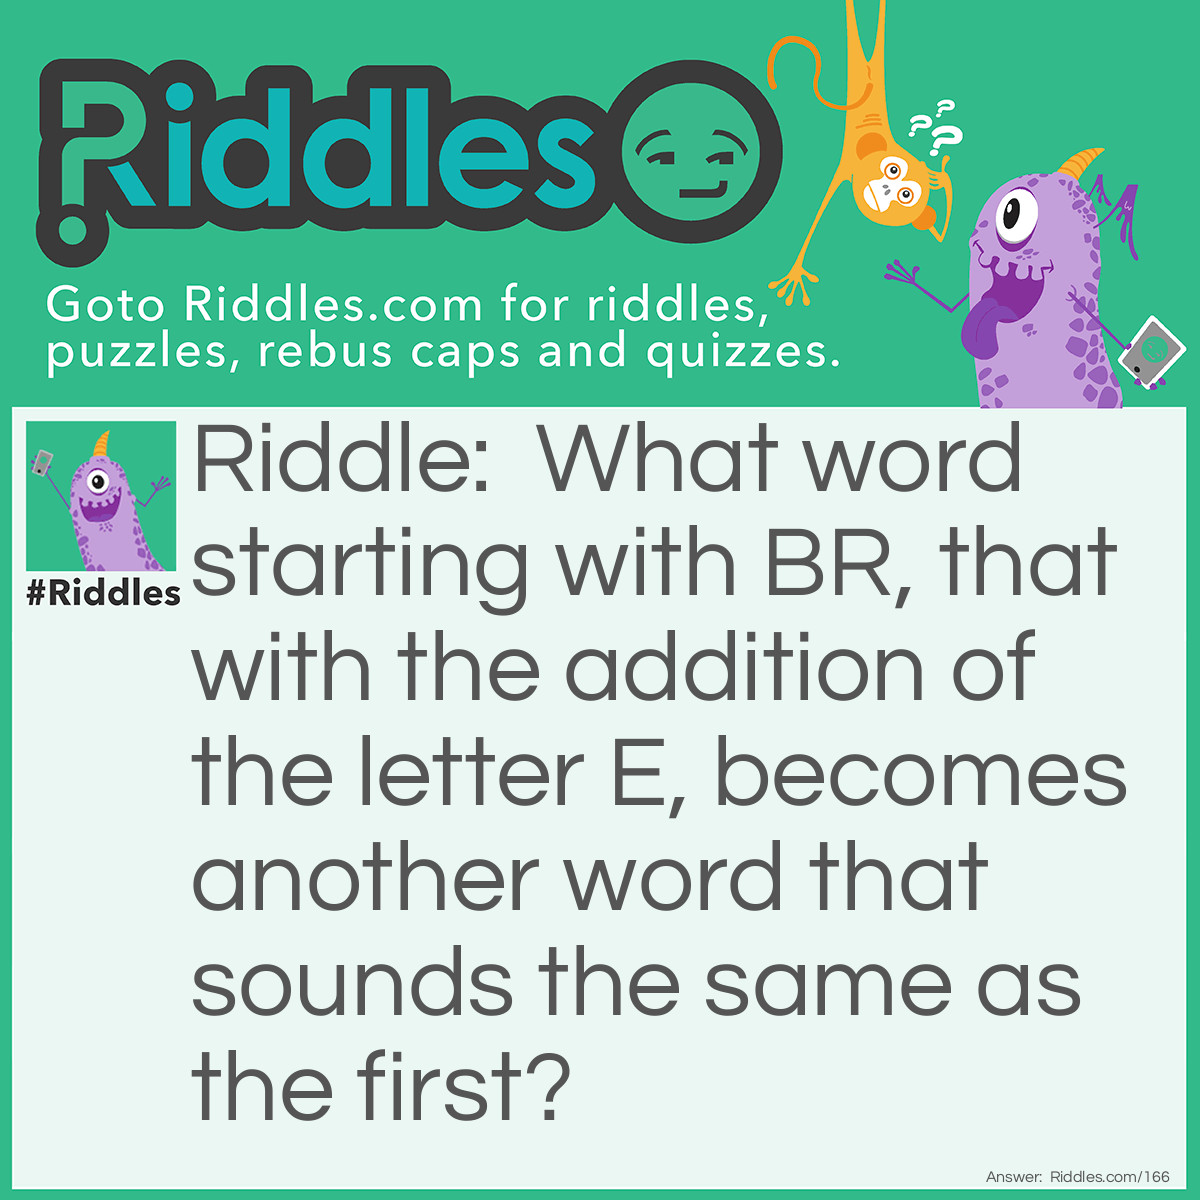 Riddle: What word starting with BR, that with the addition of the letter E, becomes another word that sounds the same as the first? Answer: Braking becomes Breaking.